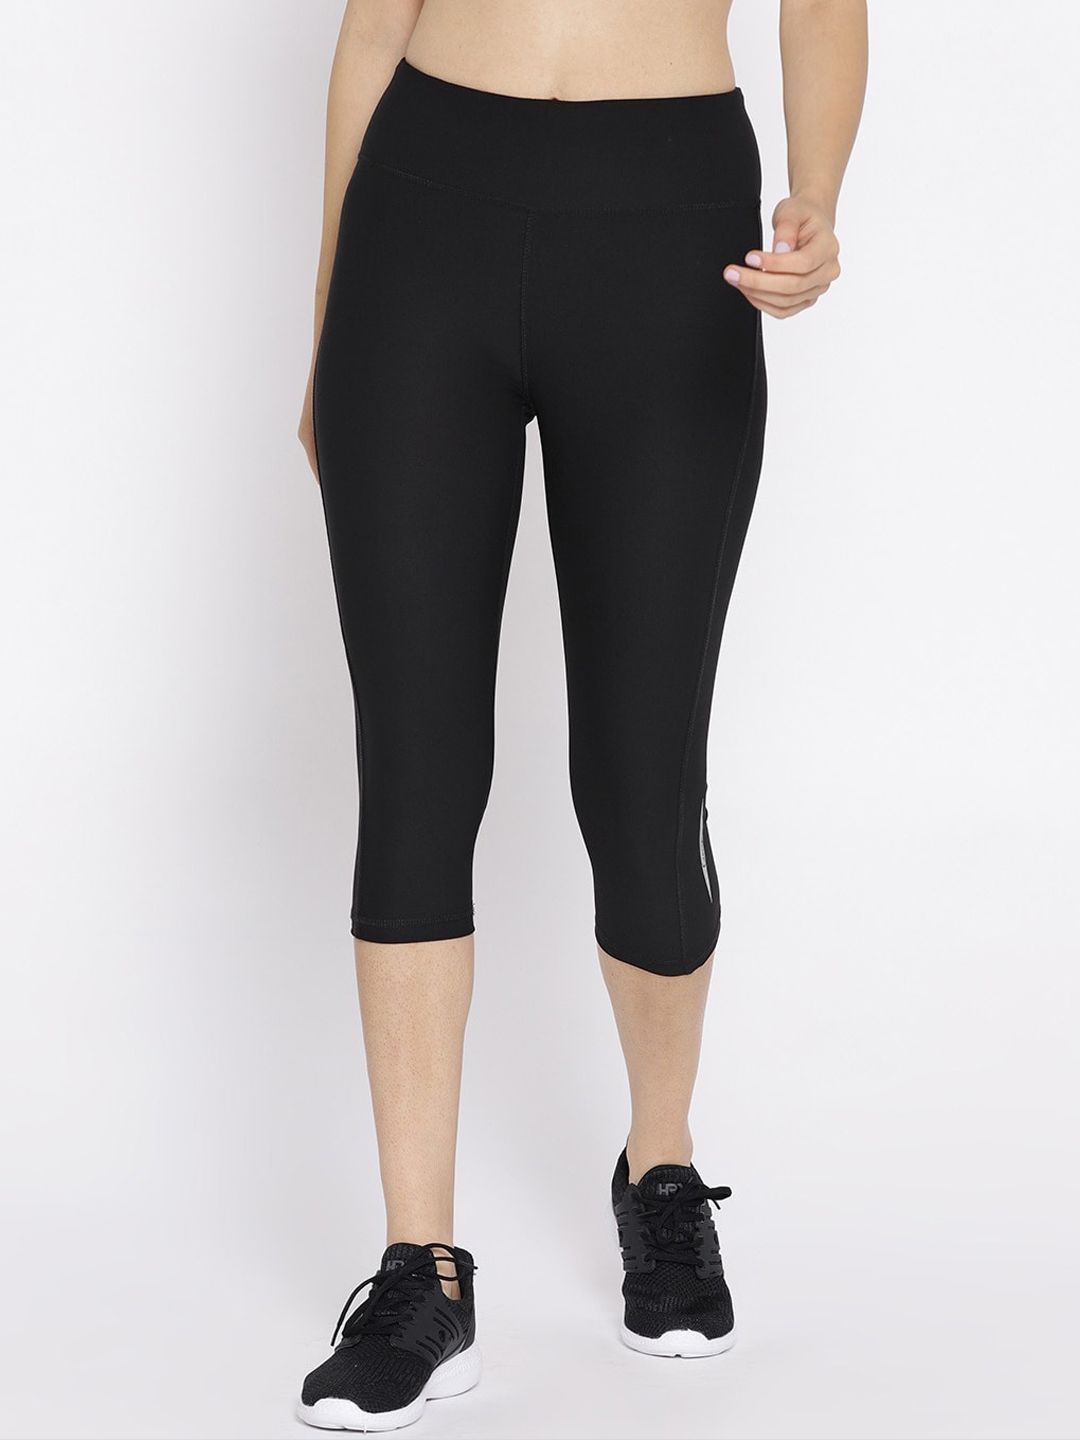 Kanvin Women Black Solid Calf Length Training Tights Price in India